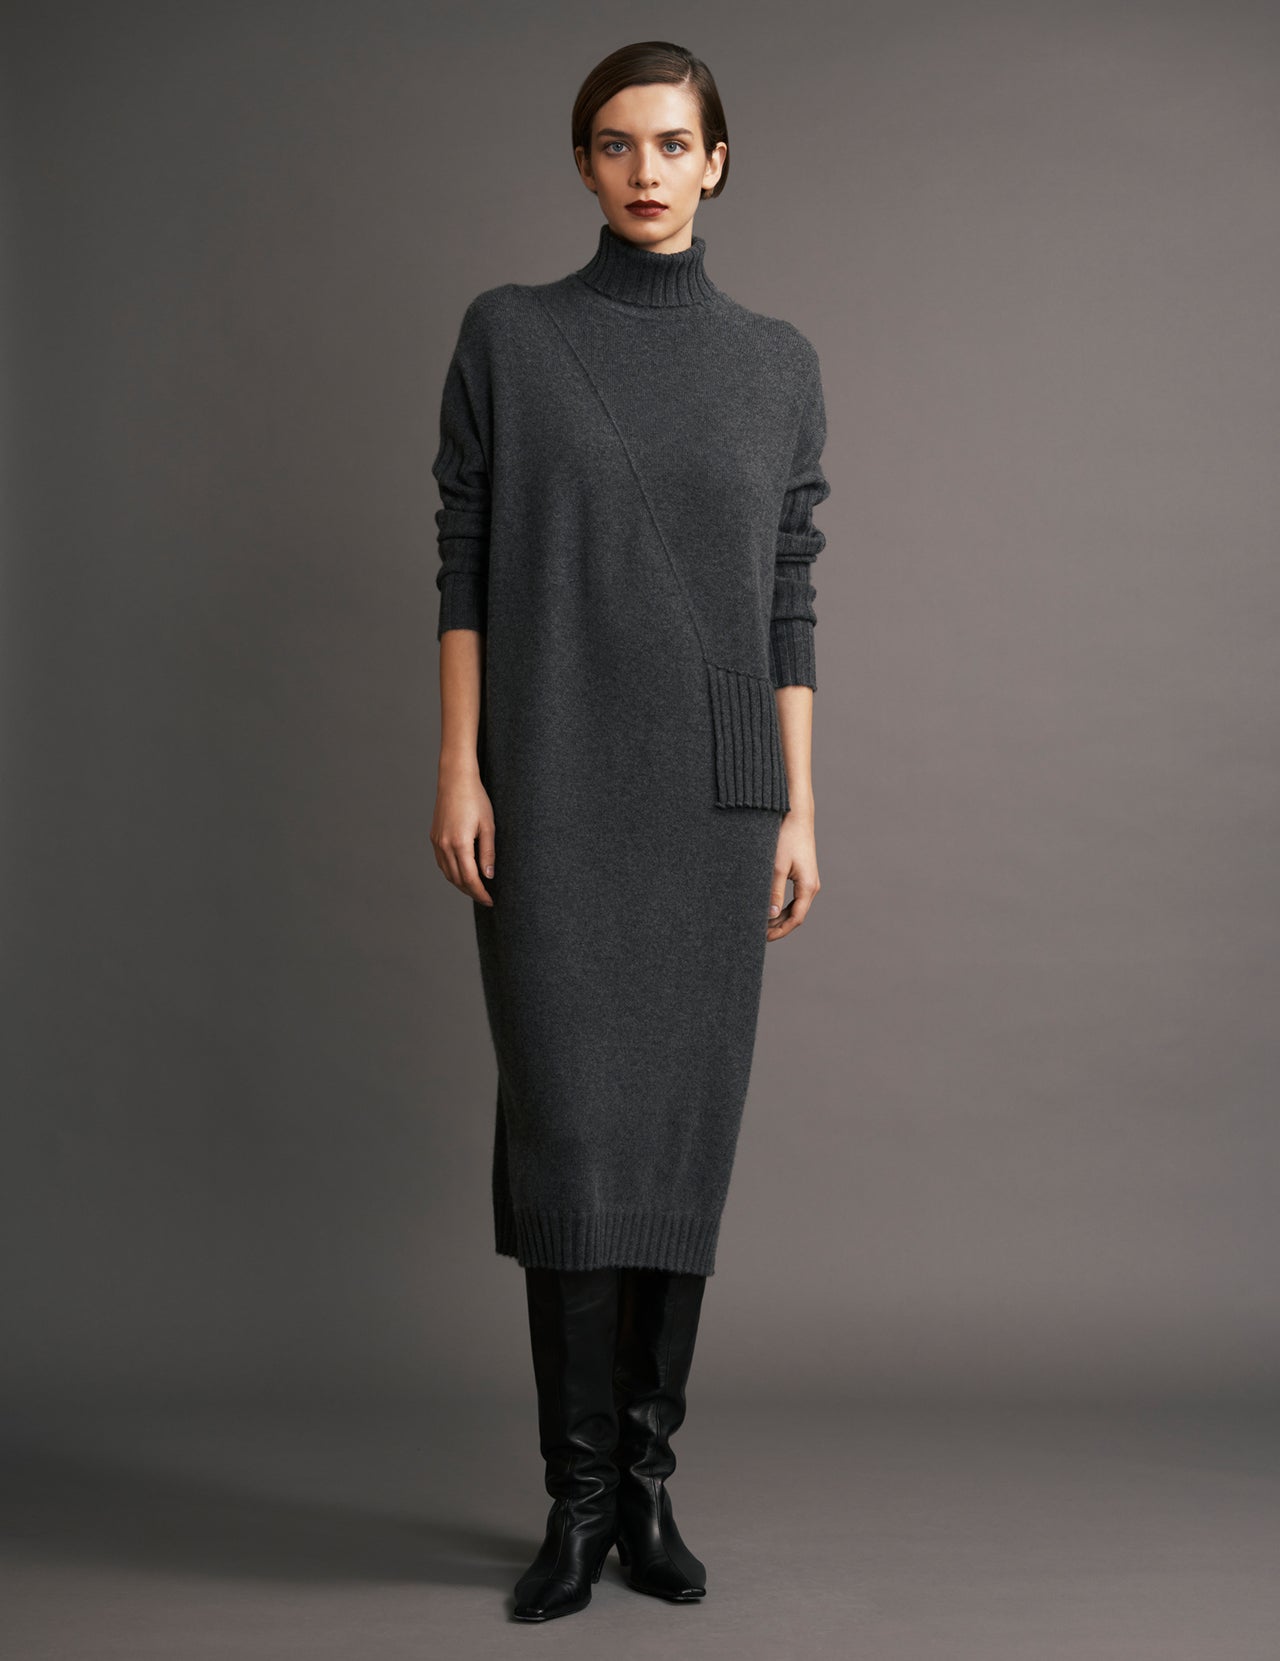  Flannel Grey Roll Neck Pleated Cashmere Dress  